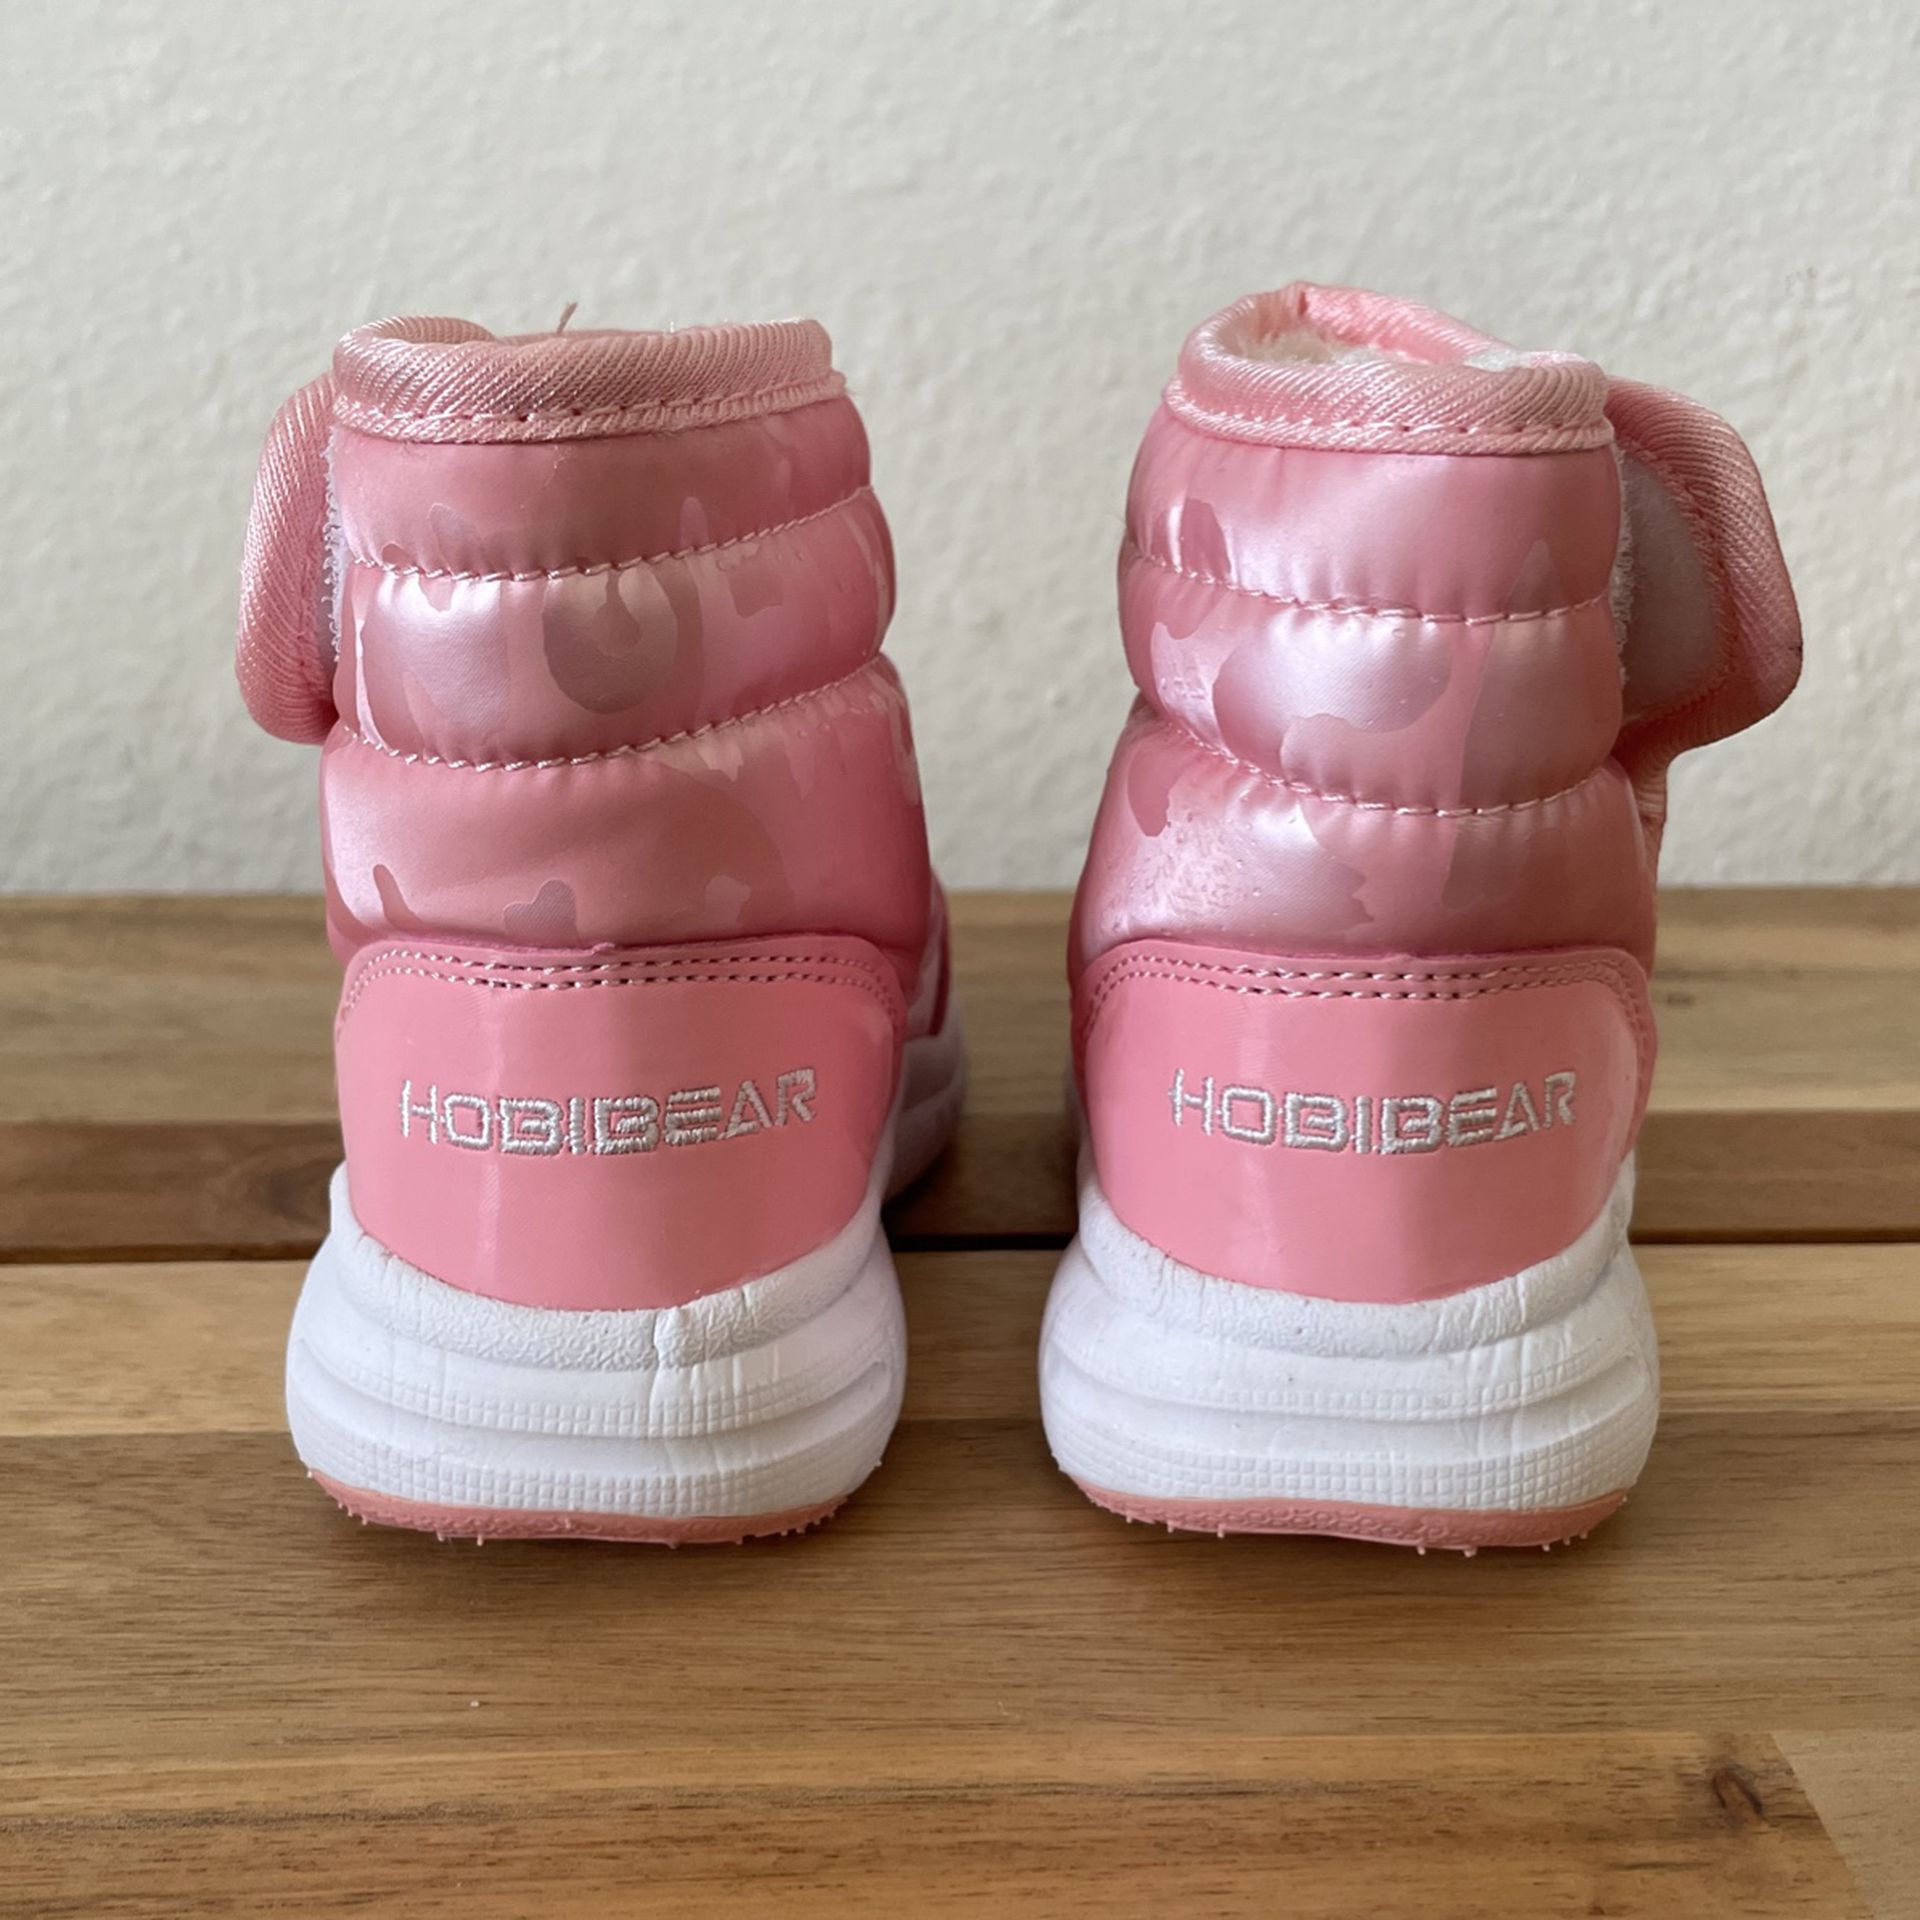 New snow boots Size 5T — worn for 30 mins max!